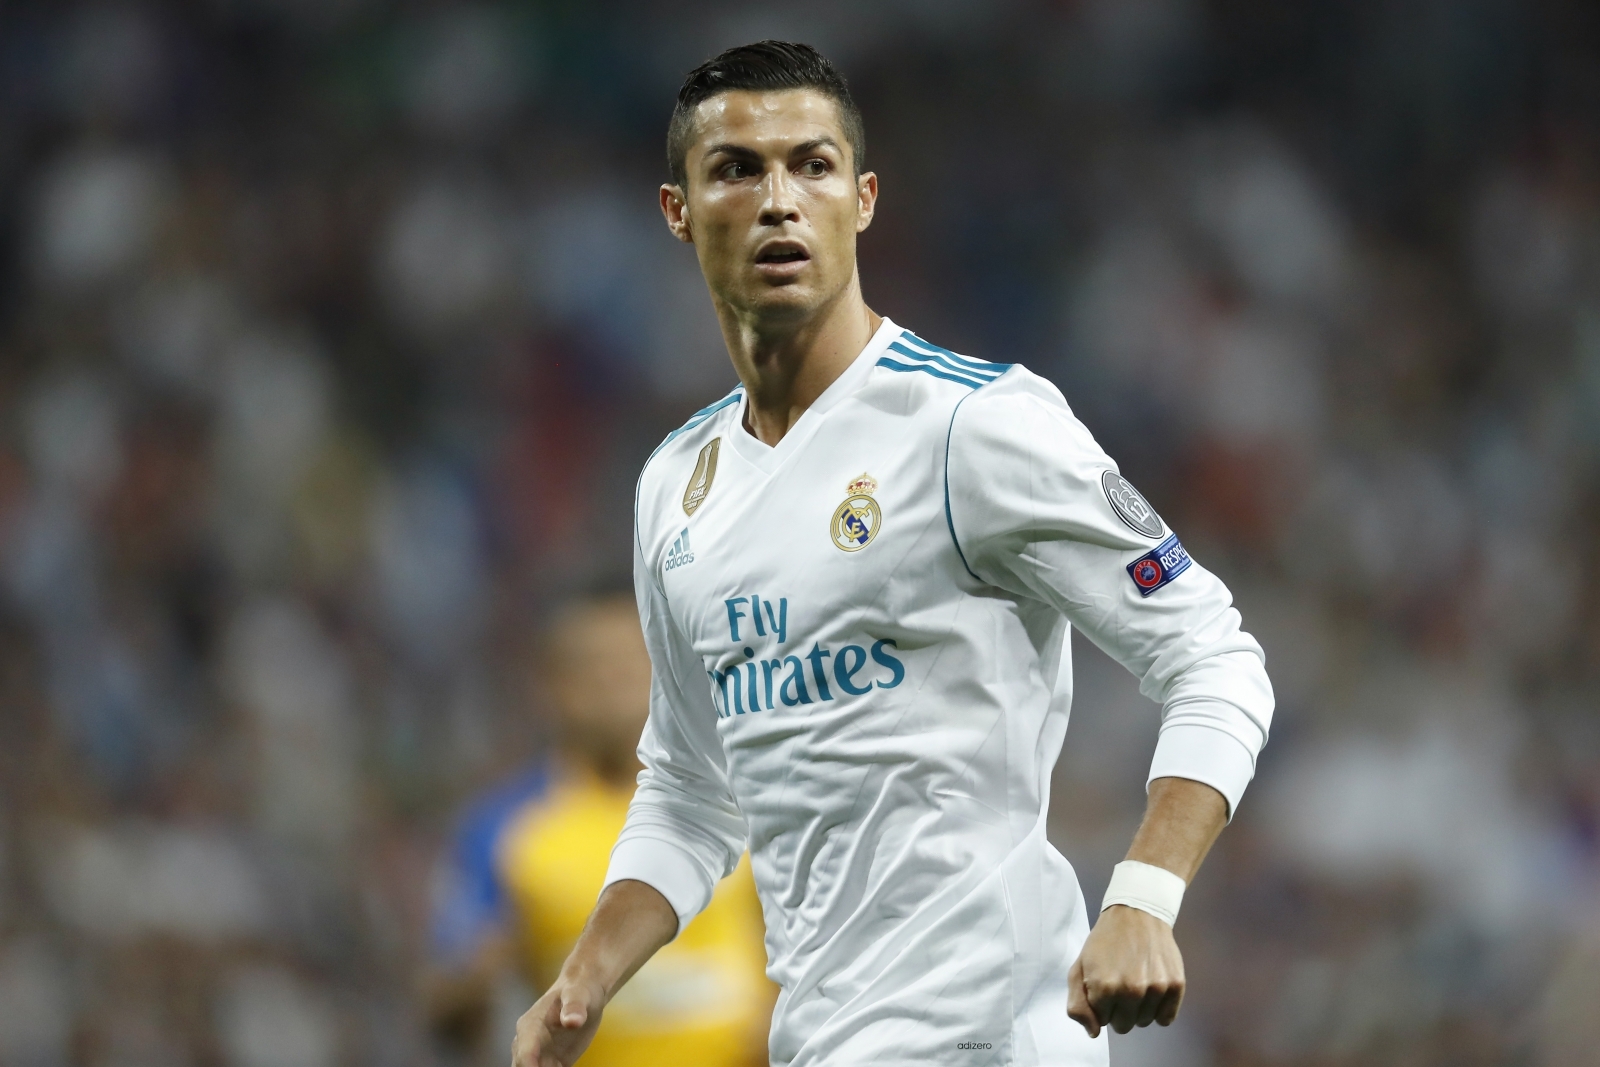 Zidane says Real Madrid star Cristiano Ronaldo is 'the best player of his genera